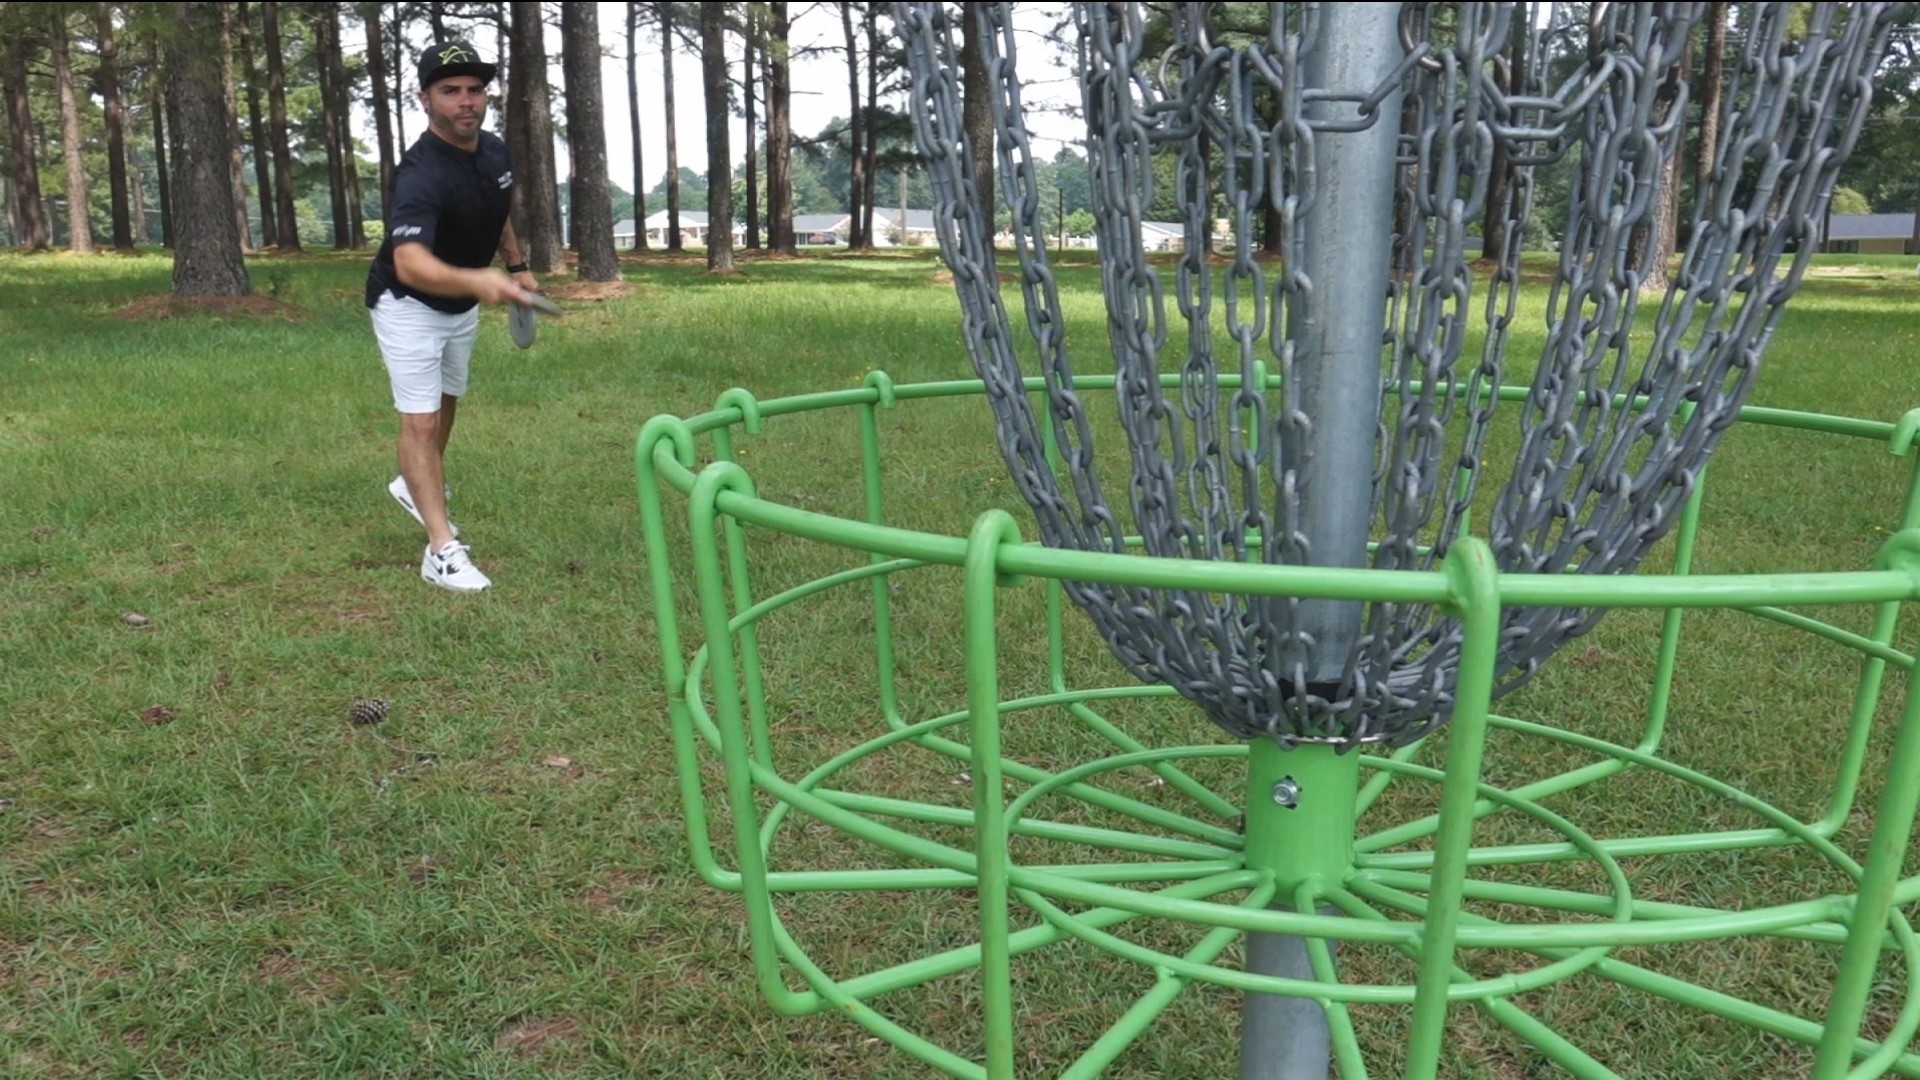 A new disc golf course is coming to Warner Robins, and the grand opening will include a tournament!